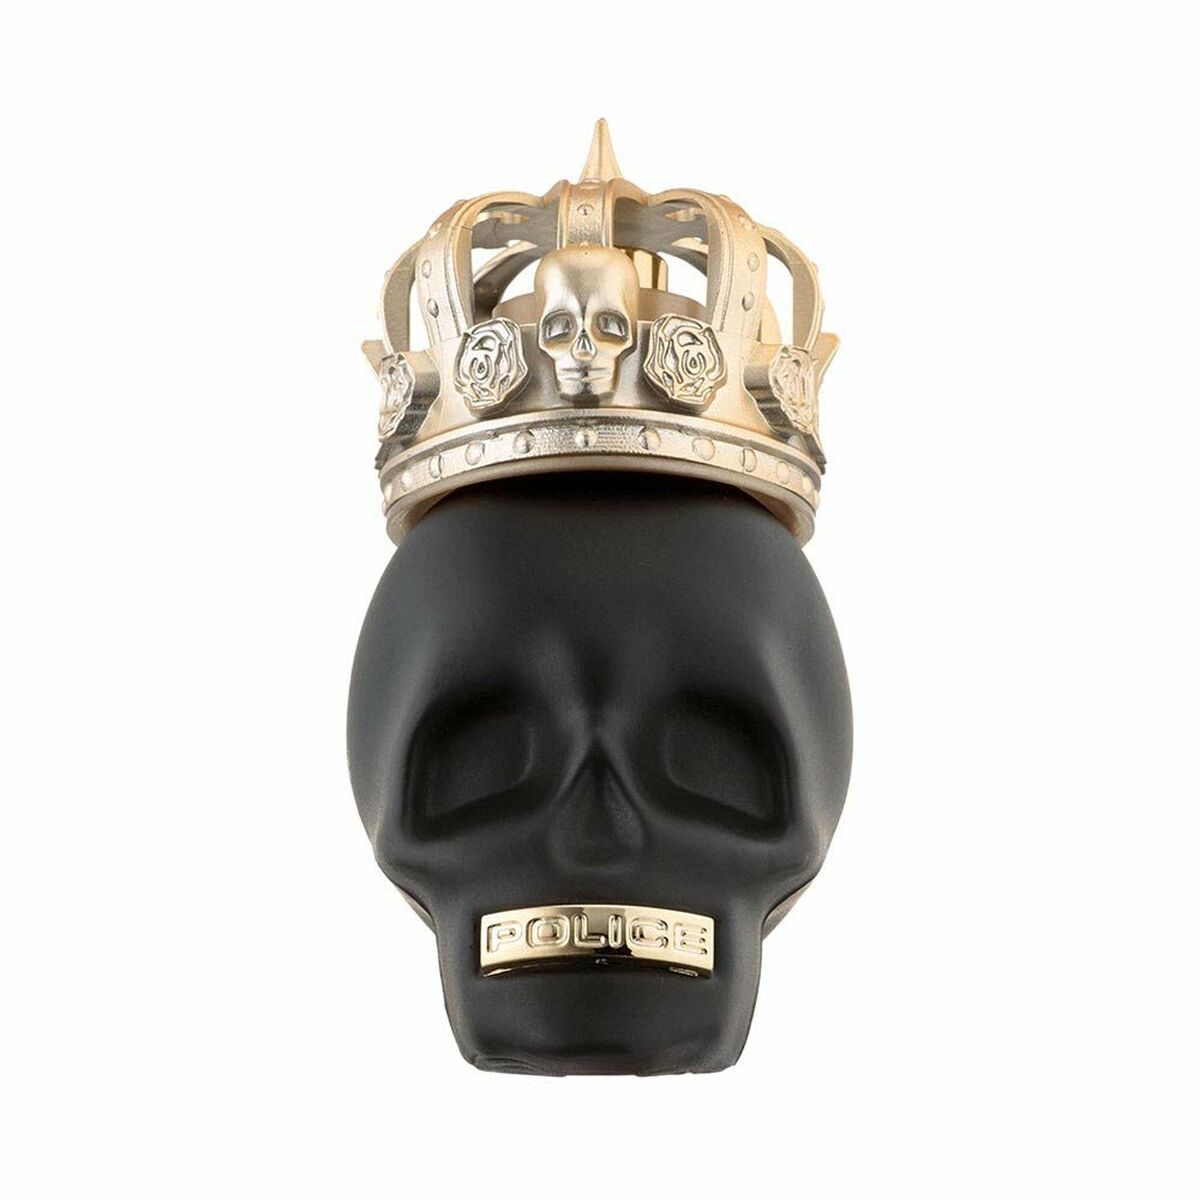 Herenparfum Police EDT To Be The King 125 ml